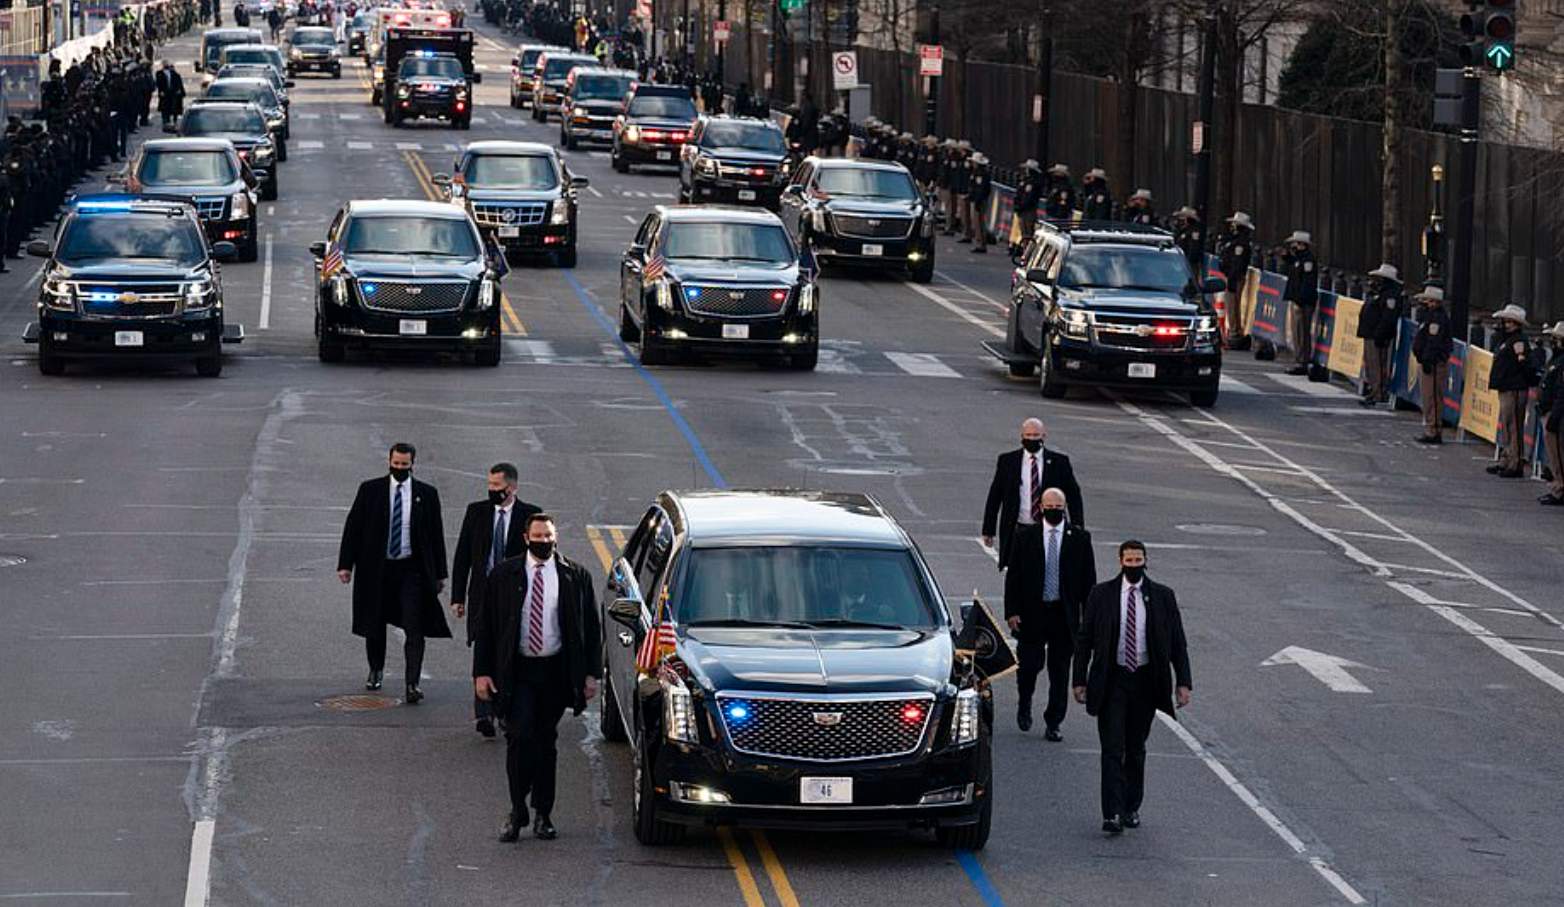 The US President's vehicle known as The Beast makes its way through traffic